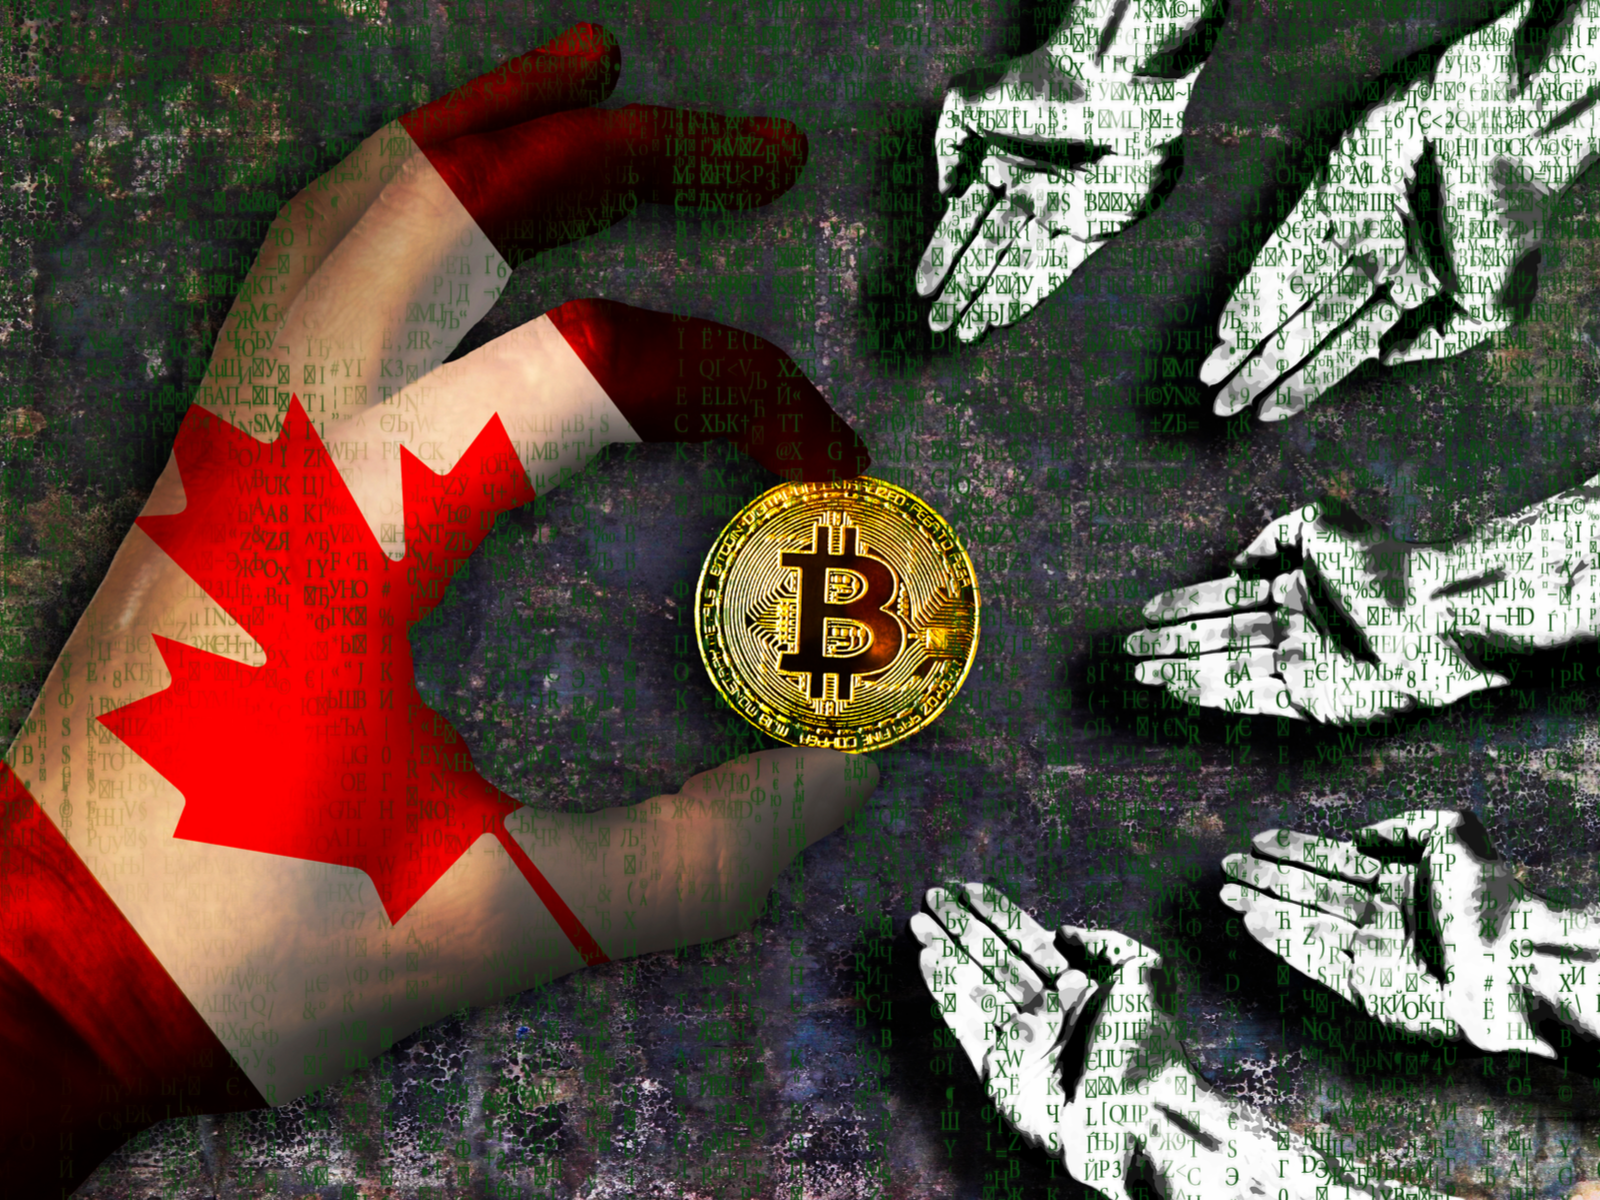 Canada’s Tax Agency Poses Probing Questions to Cryptocurrency Owners